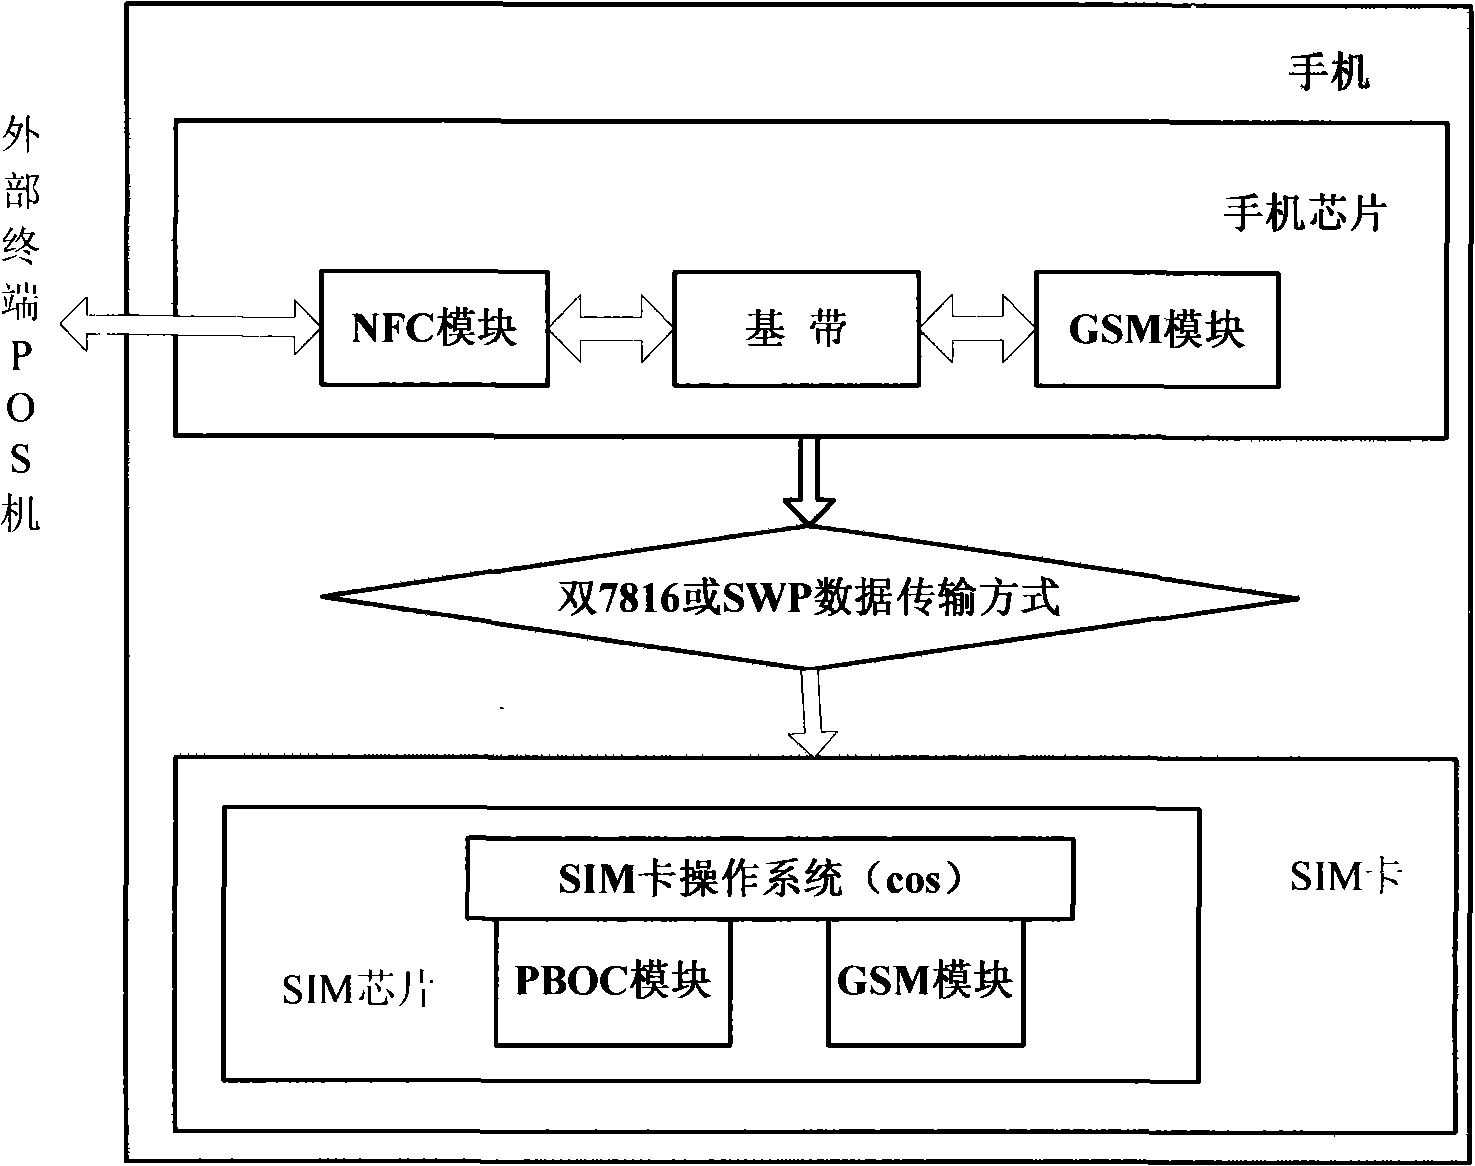 Method for receiving and processing multi-terminal information by self-adapting SIM chip operating system